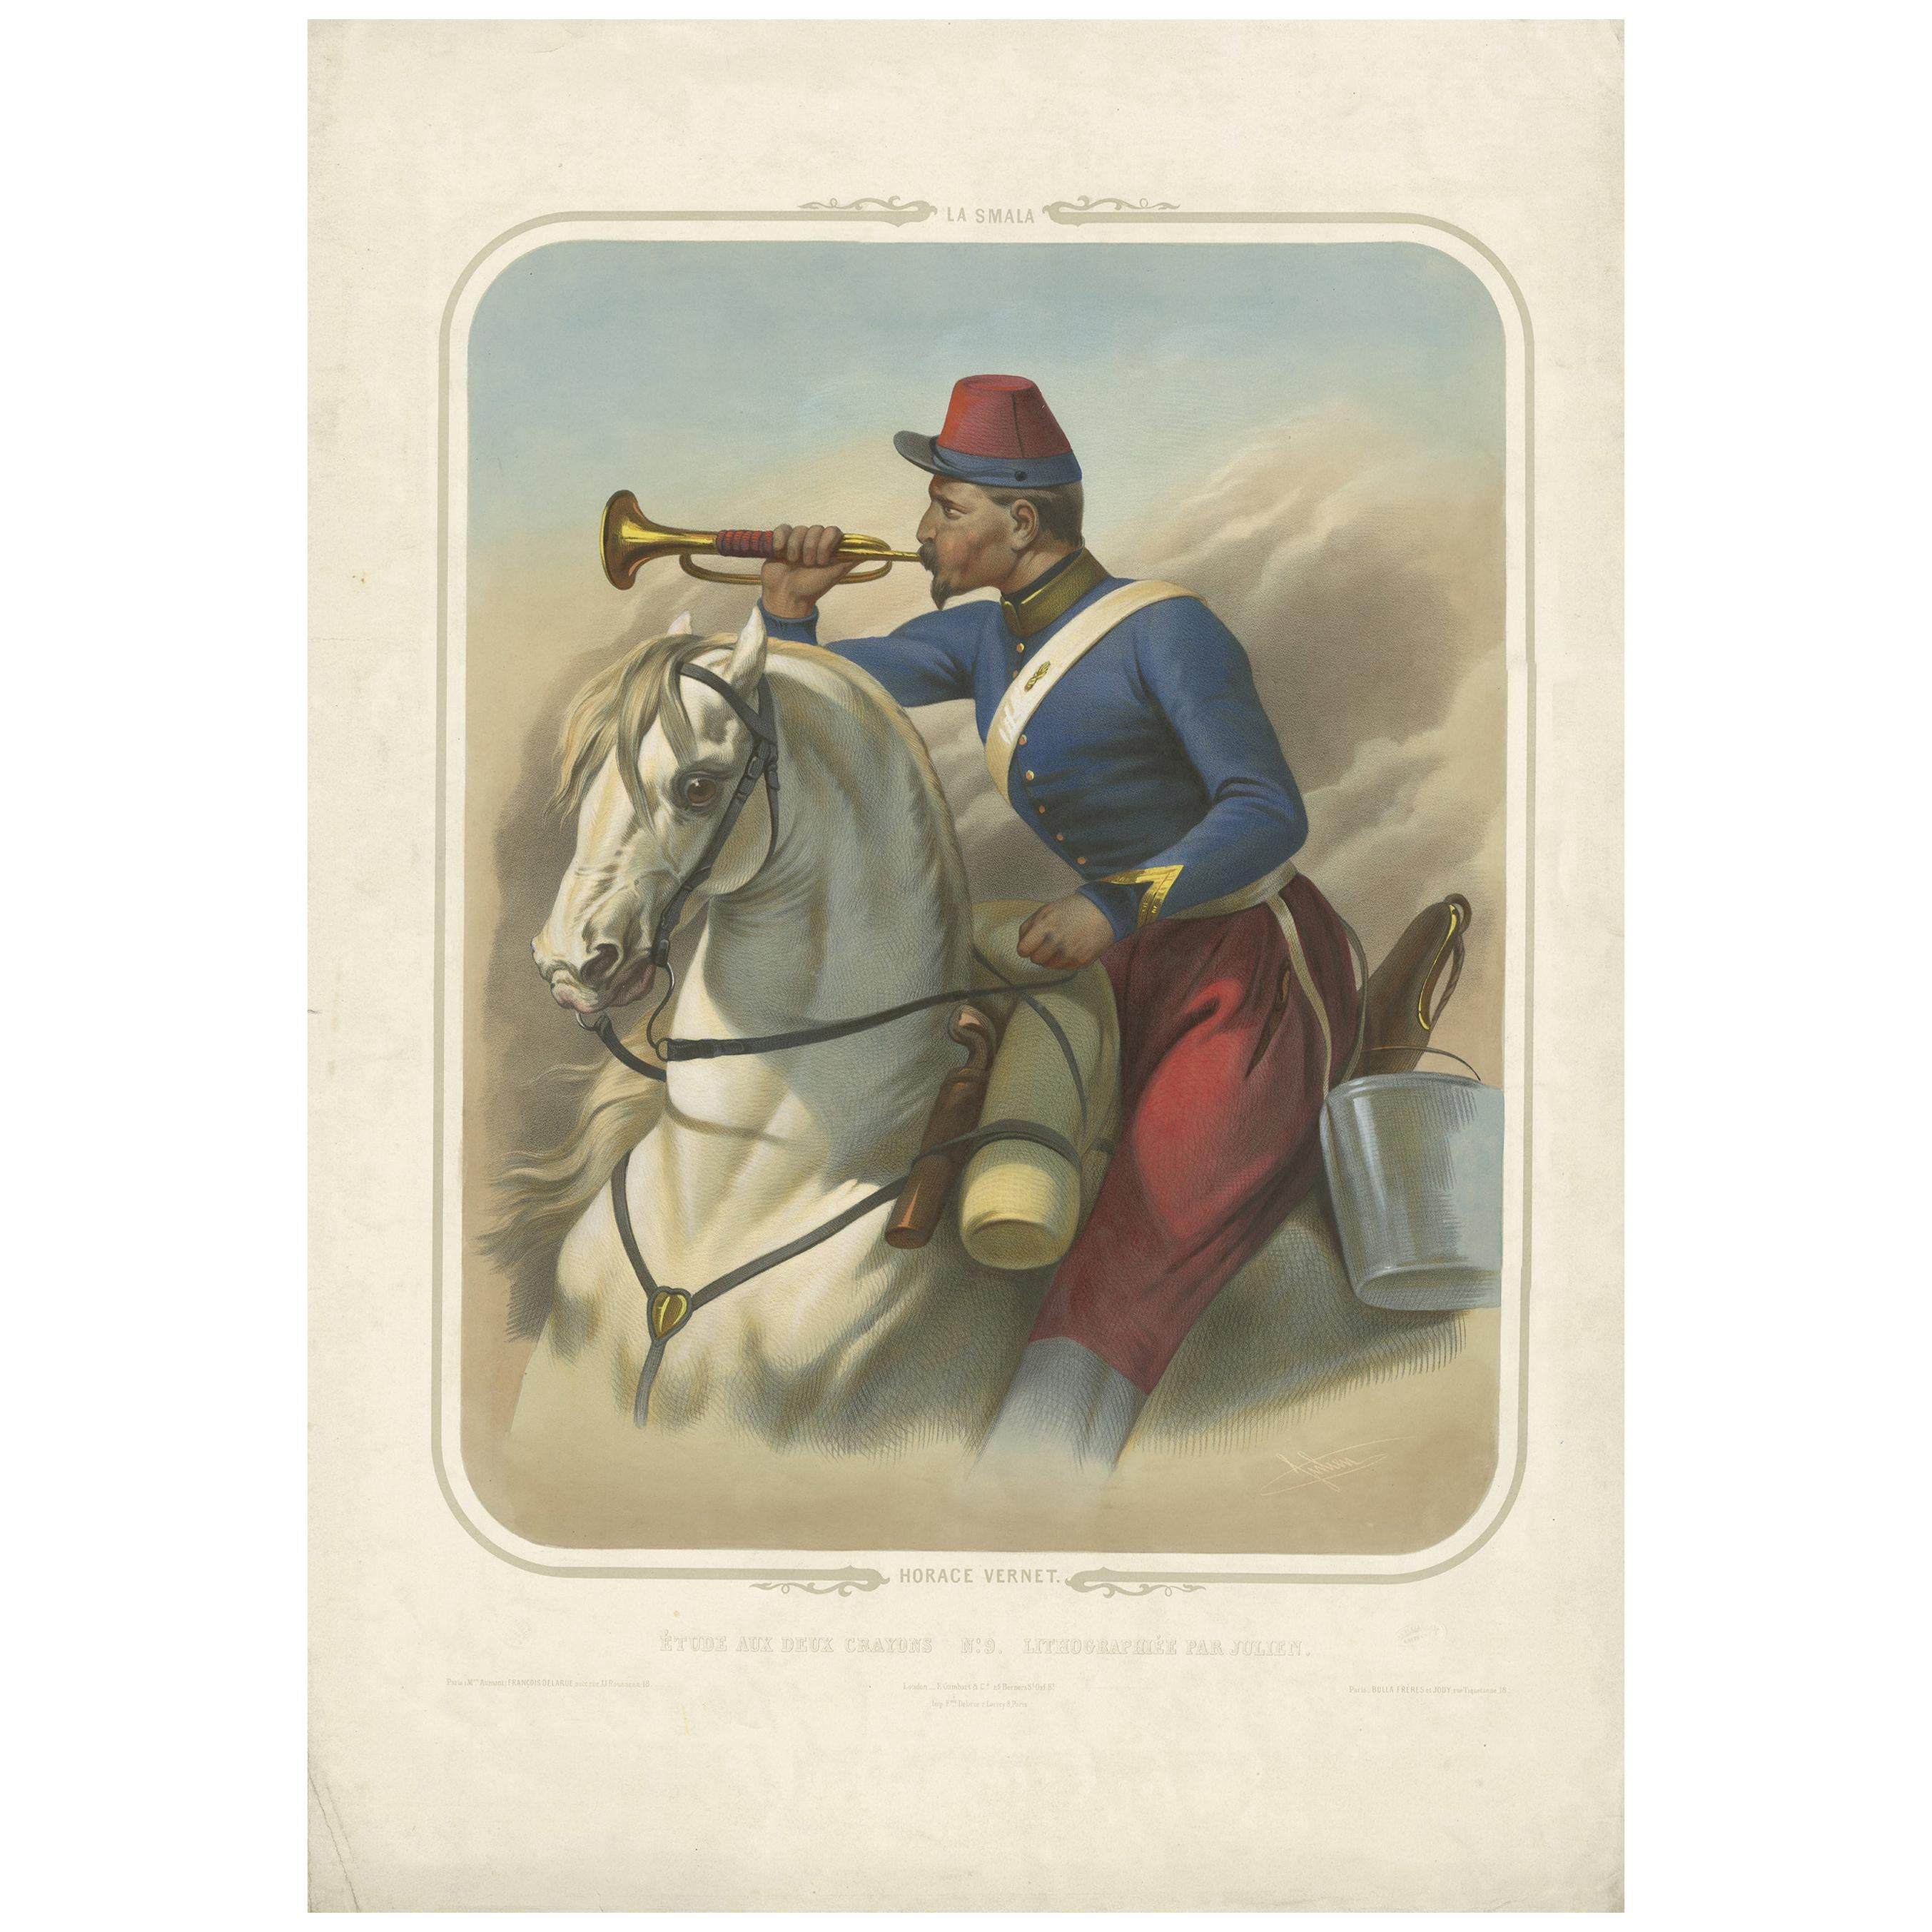 Antique Print of a French Cavalryman During the Battle of the Smala 'circa 1845'